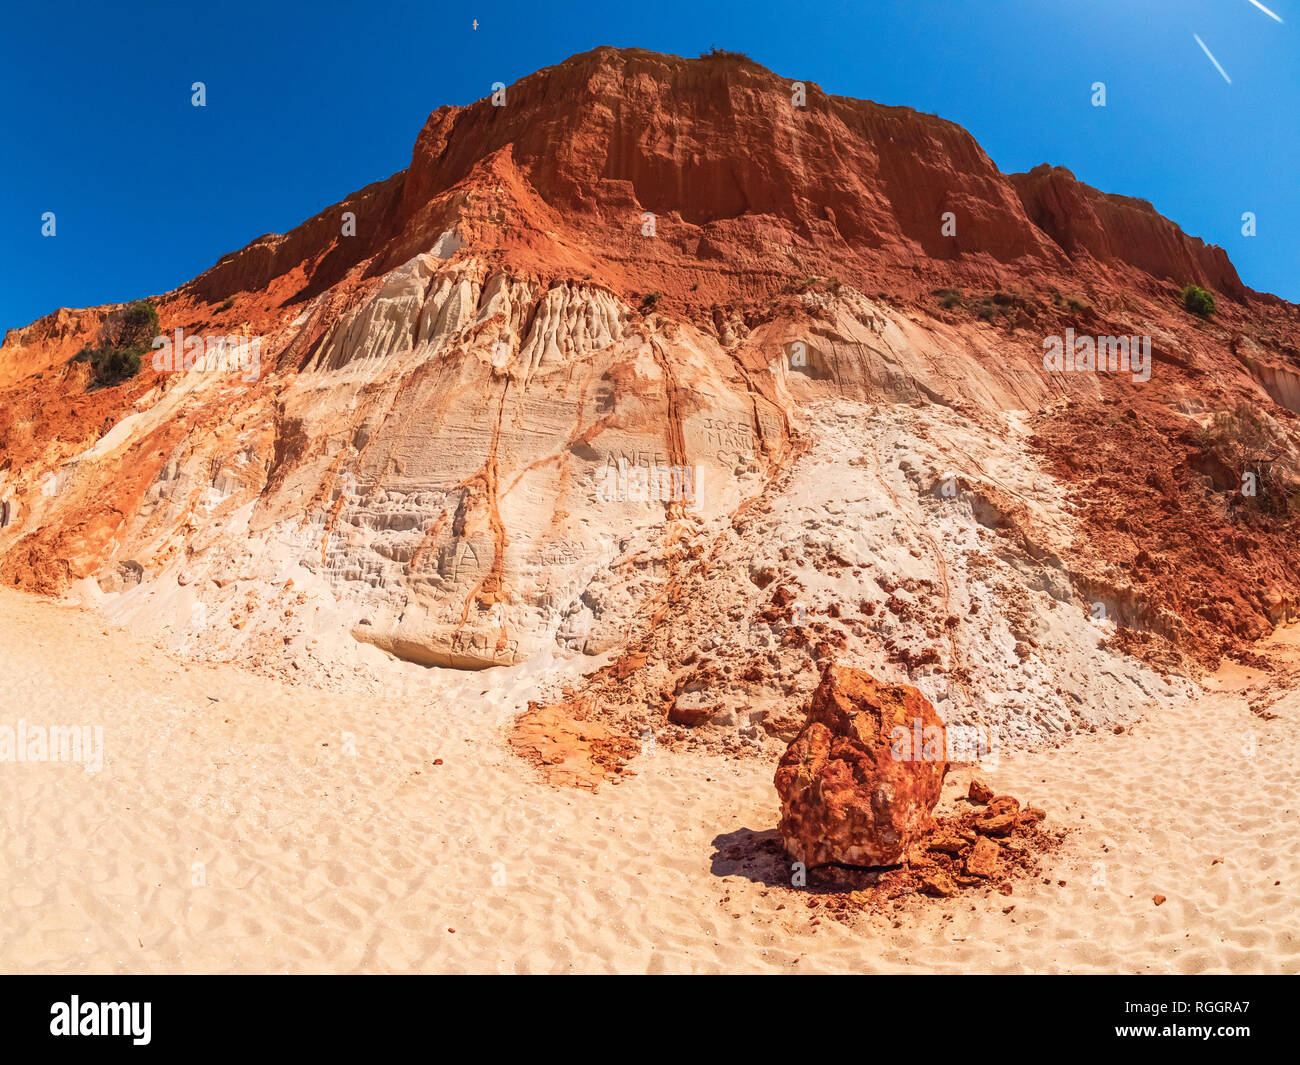 Portugal, Algarve, rock formations at the beach Stock Photo